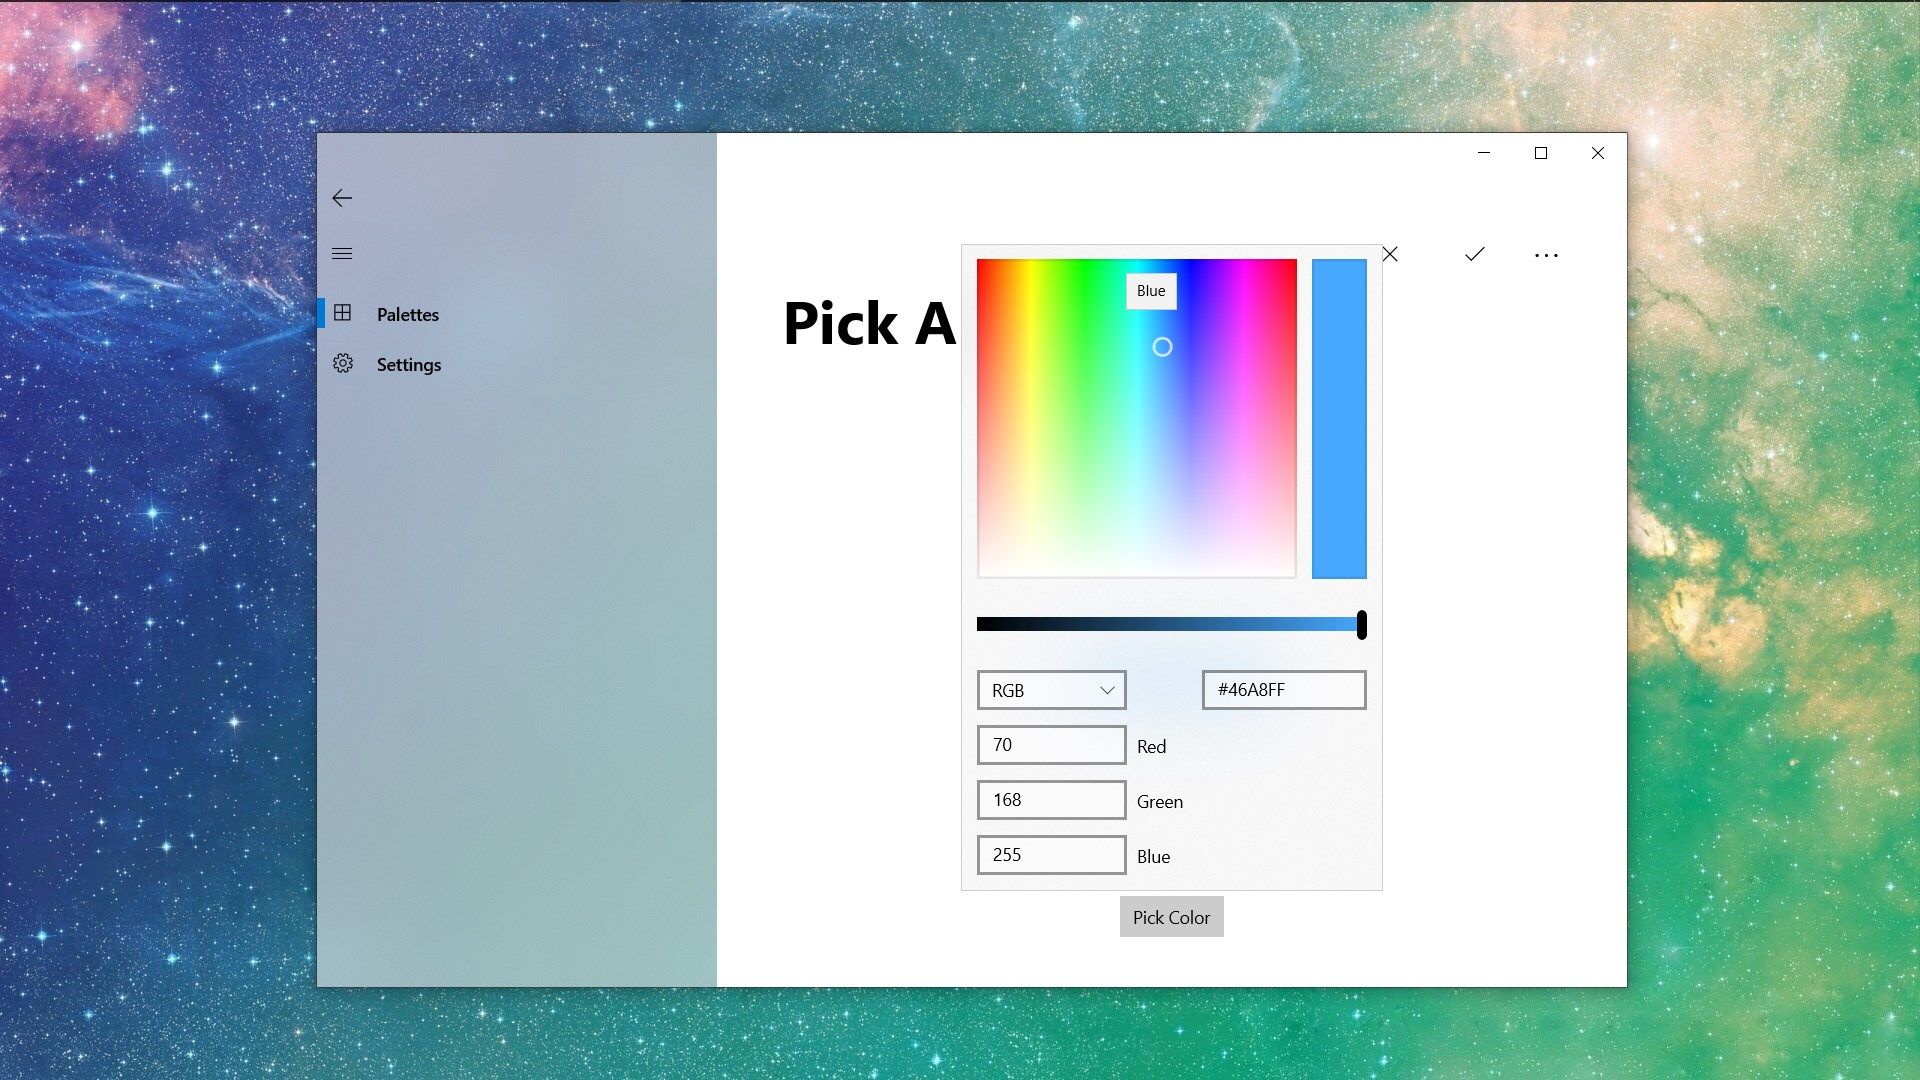 When adding or editing colors, you get access to this color picker that supports use HEX, RGB, and HSV values!